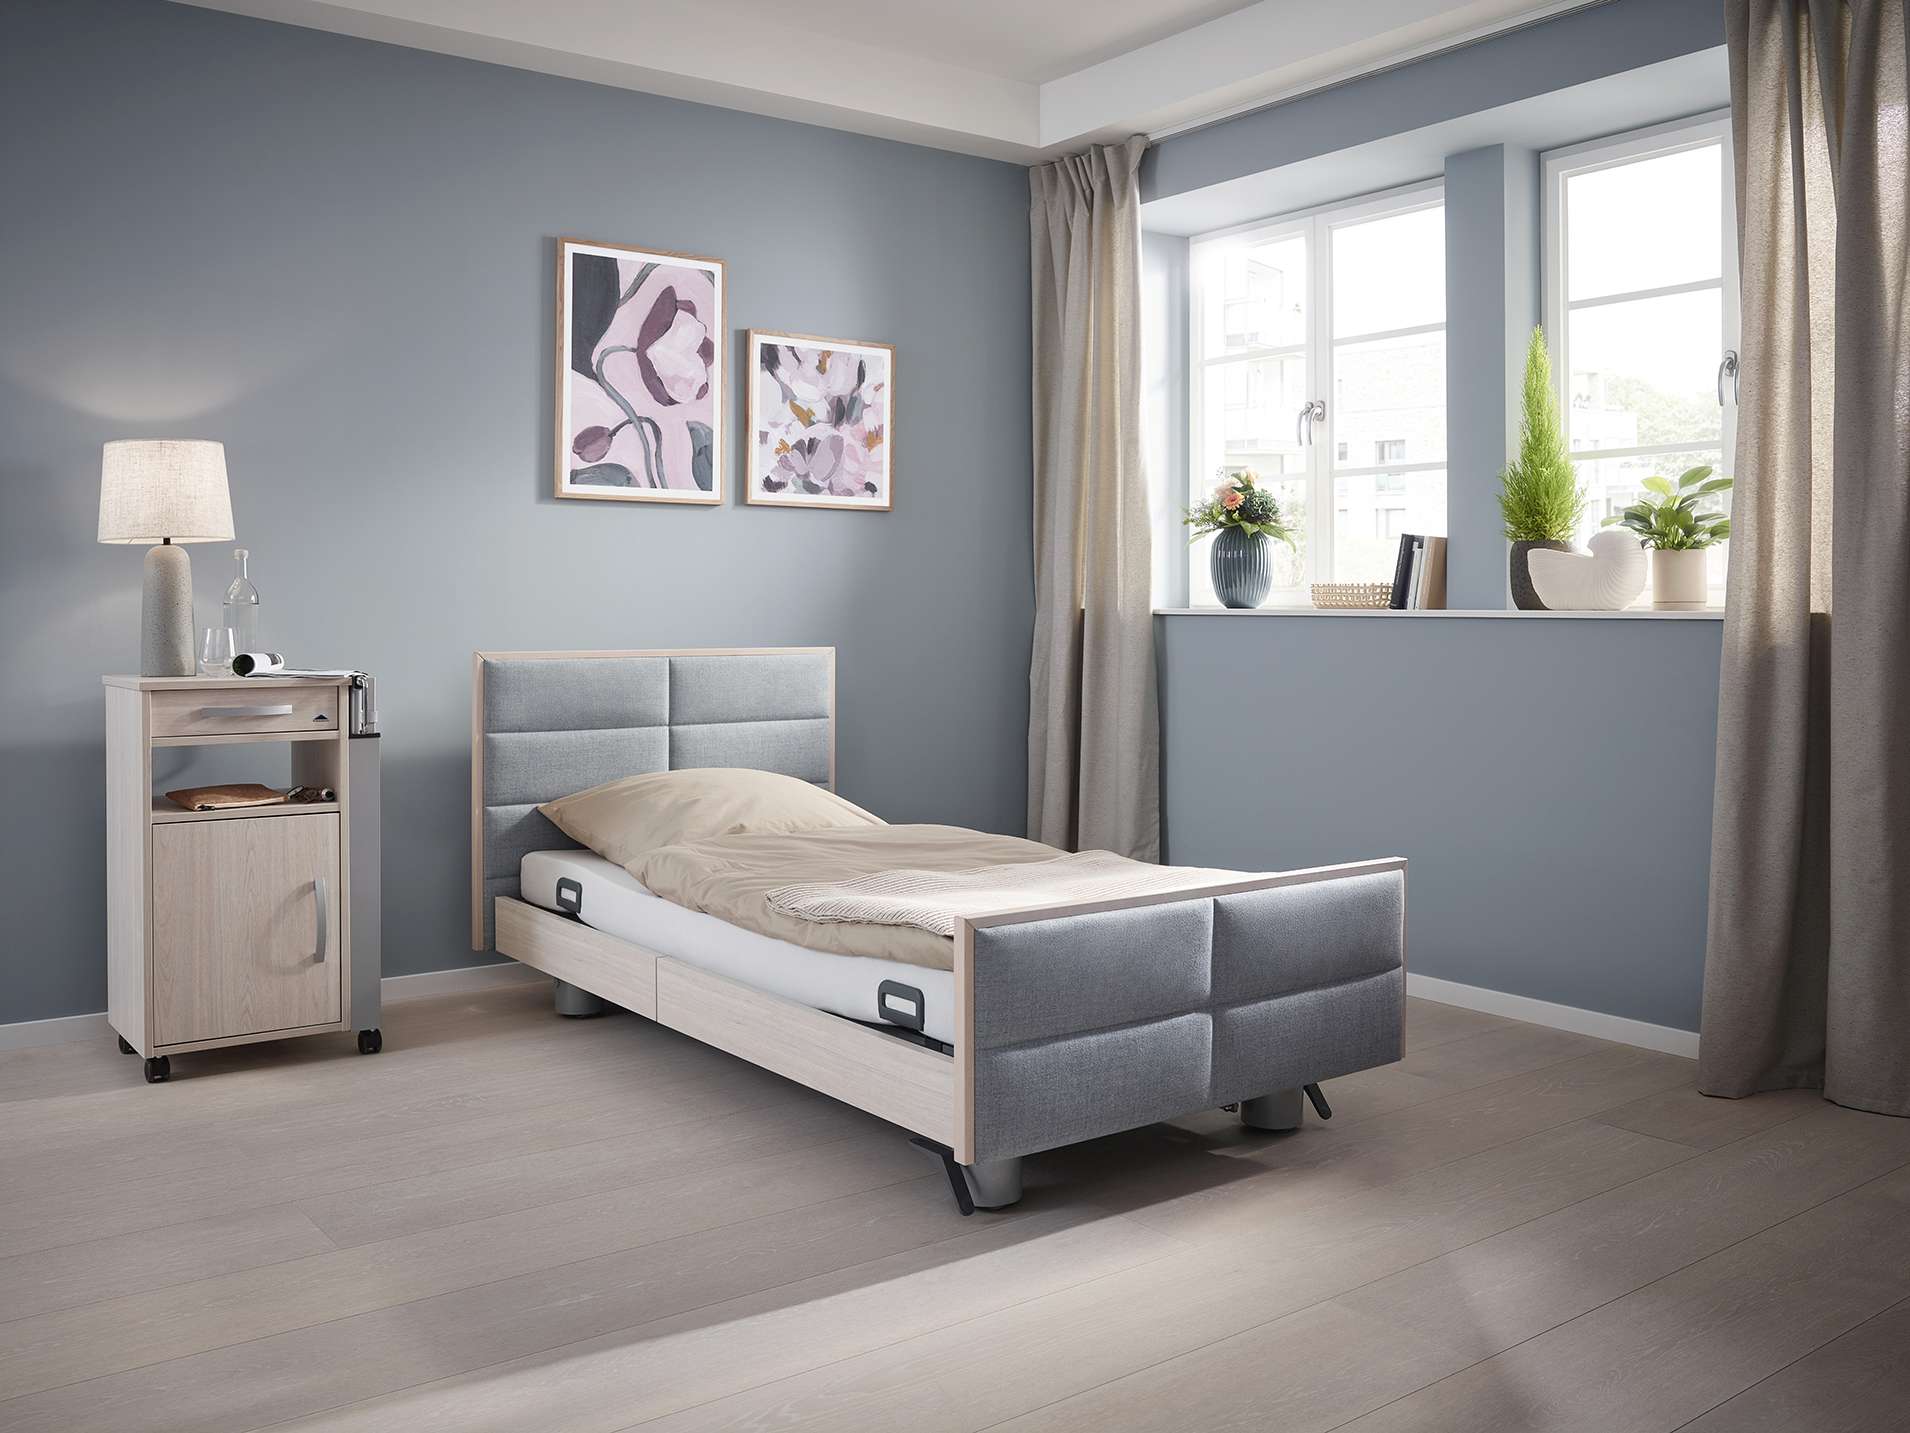 Libra - Design options for the head and footboards